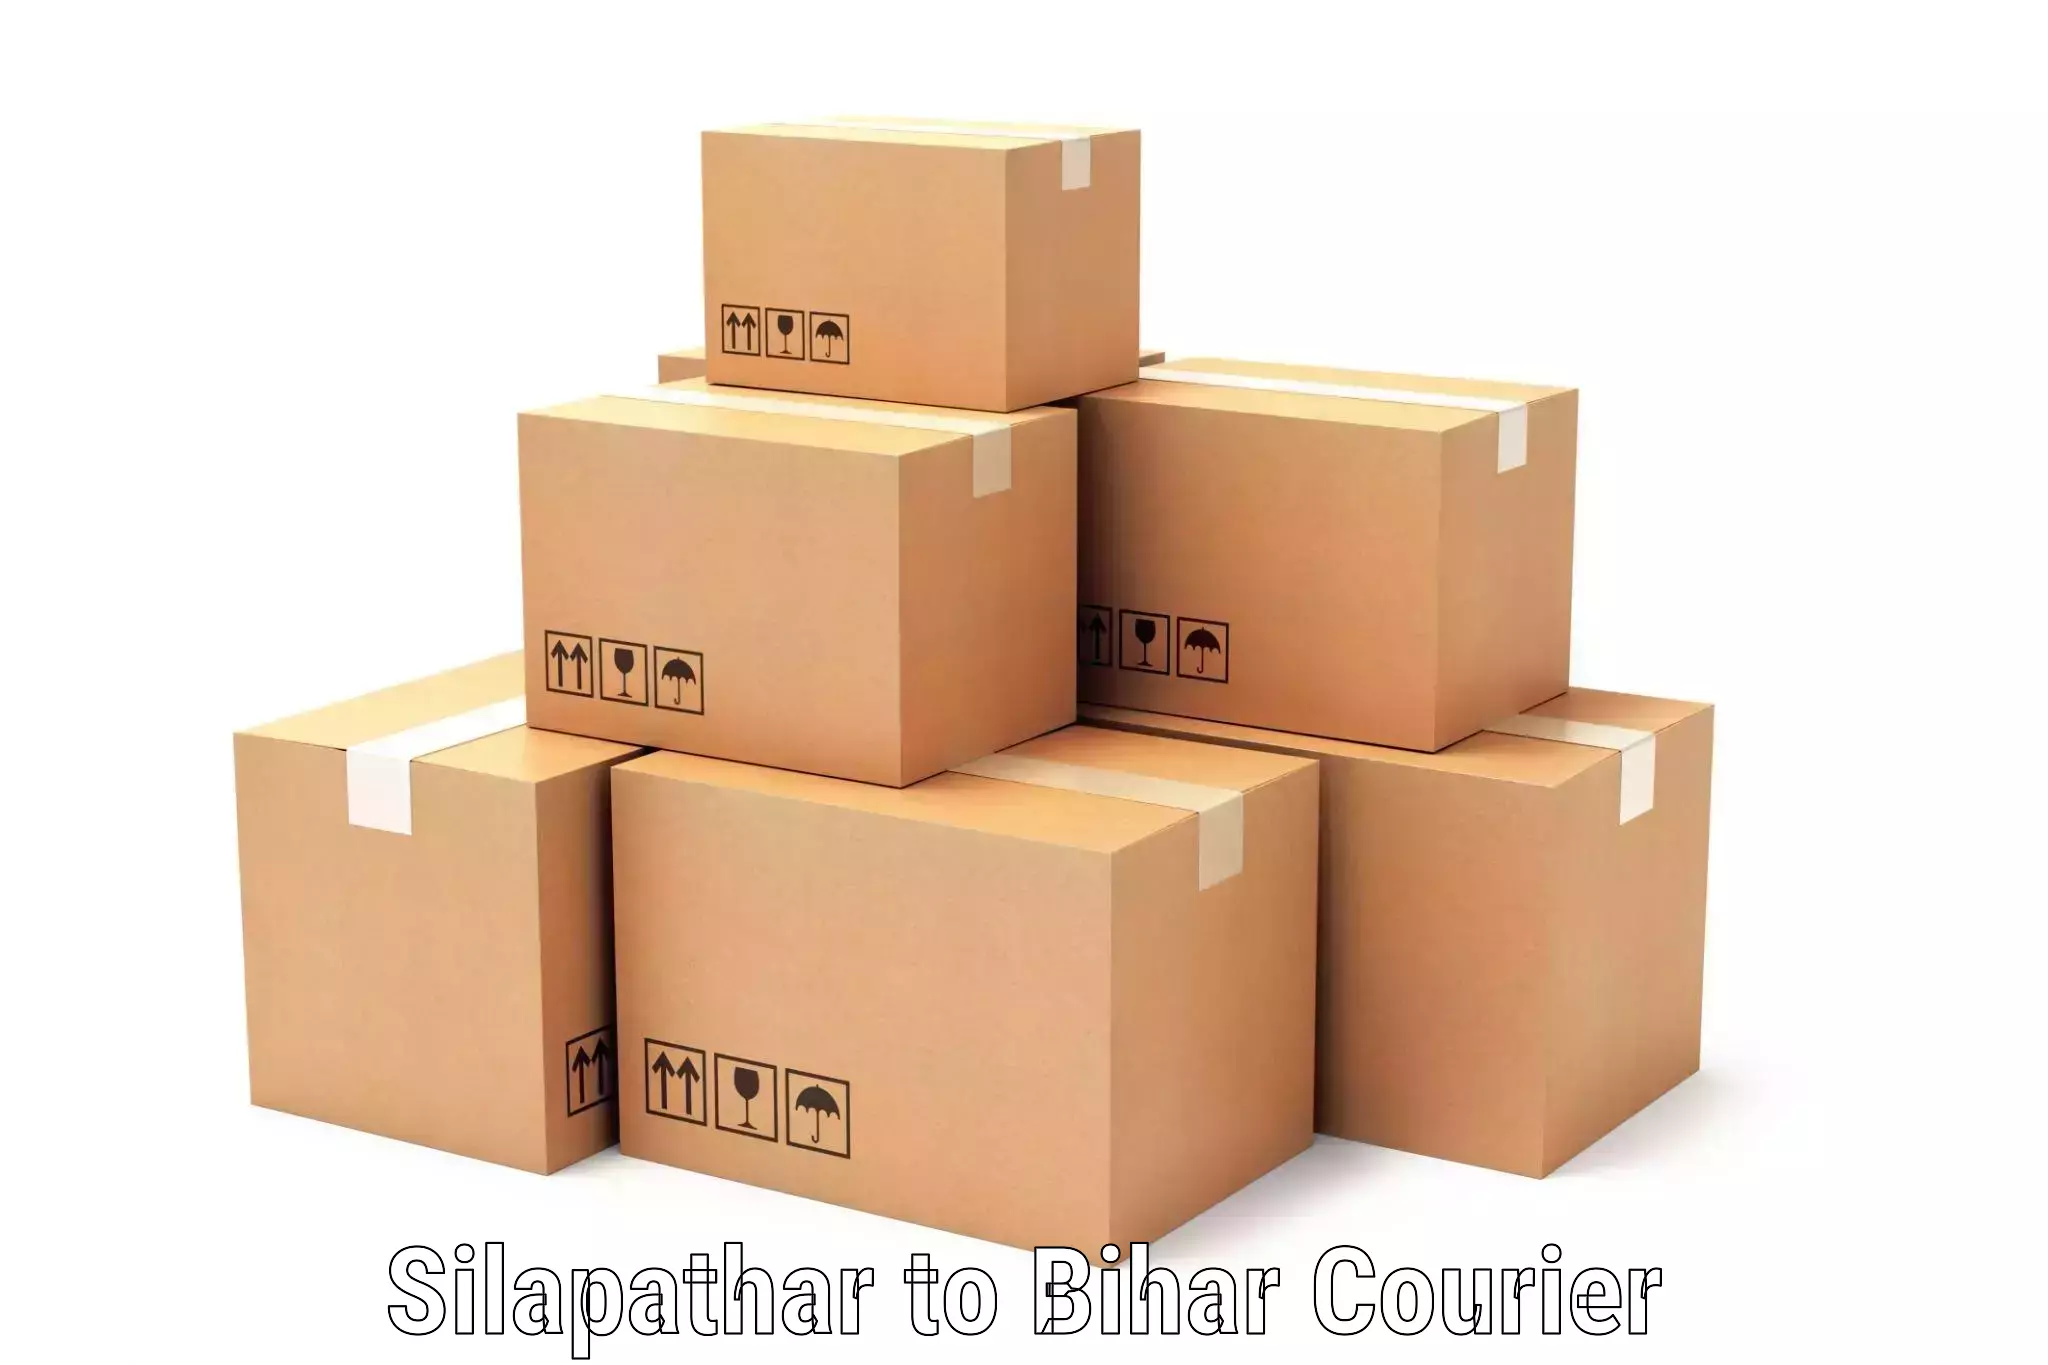 Next day courier Silapathar to Dhaka